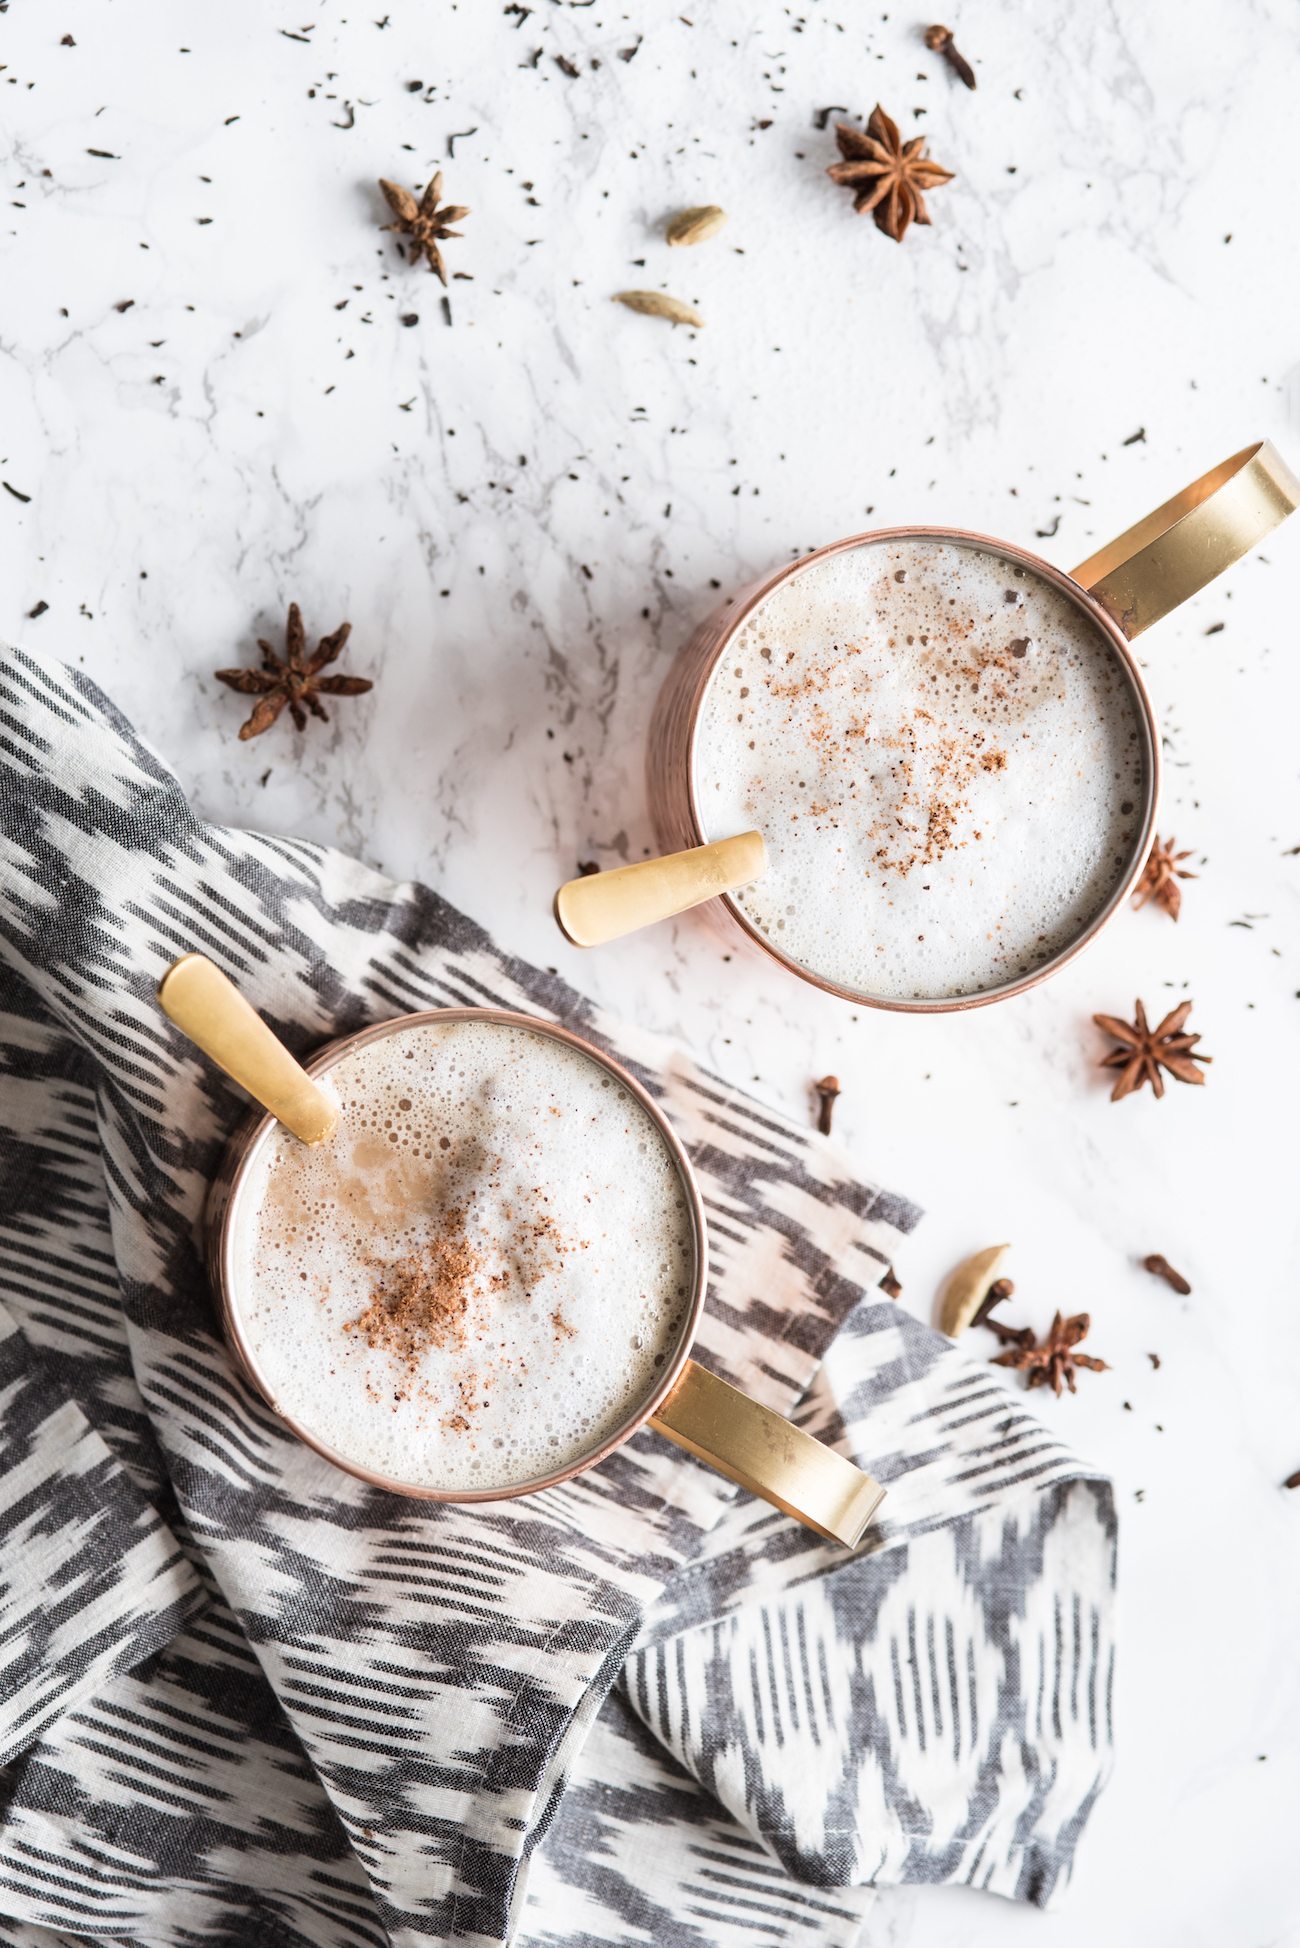 Homemade Chai Tea Latte Recipe | Entertaining tips, party ideas, recipes, cocktail recipes, party recipes and more from @cydconverse